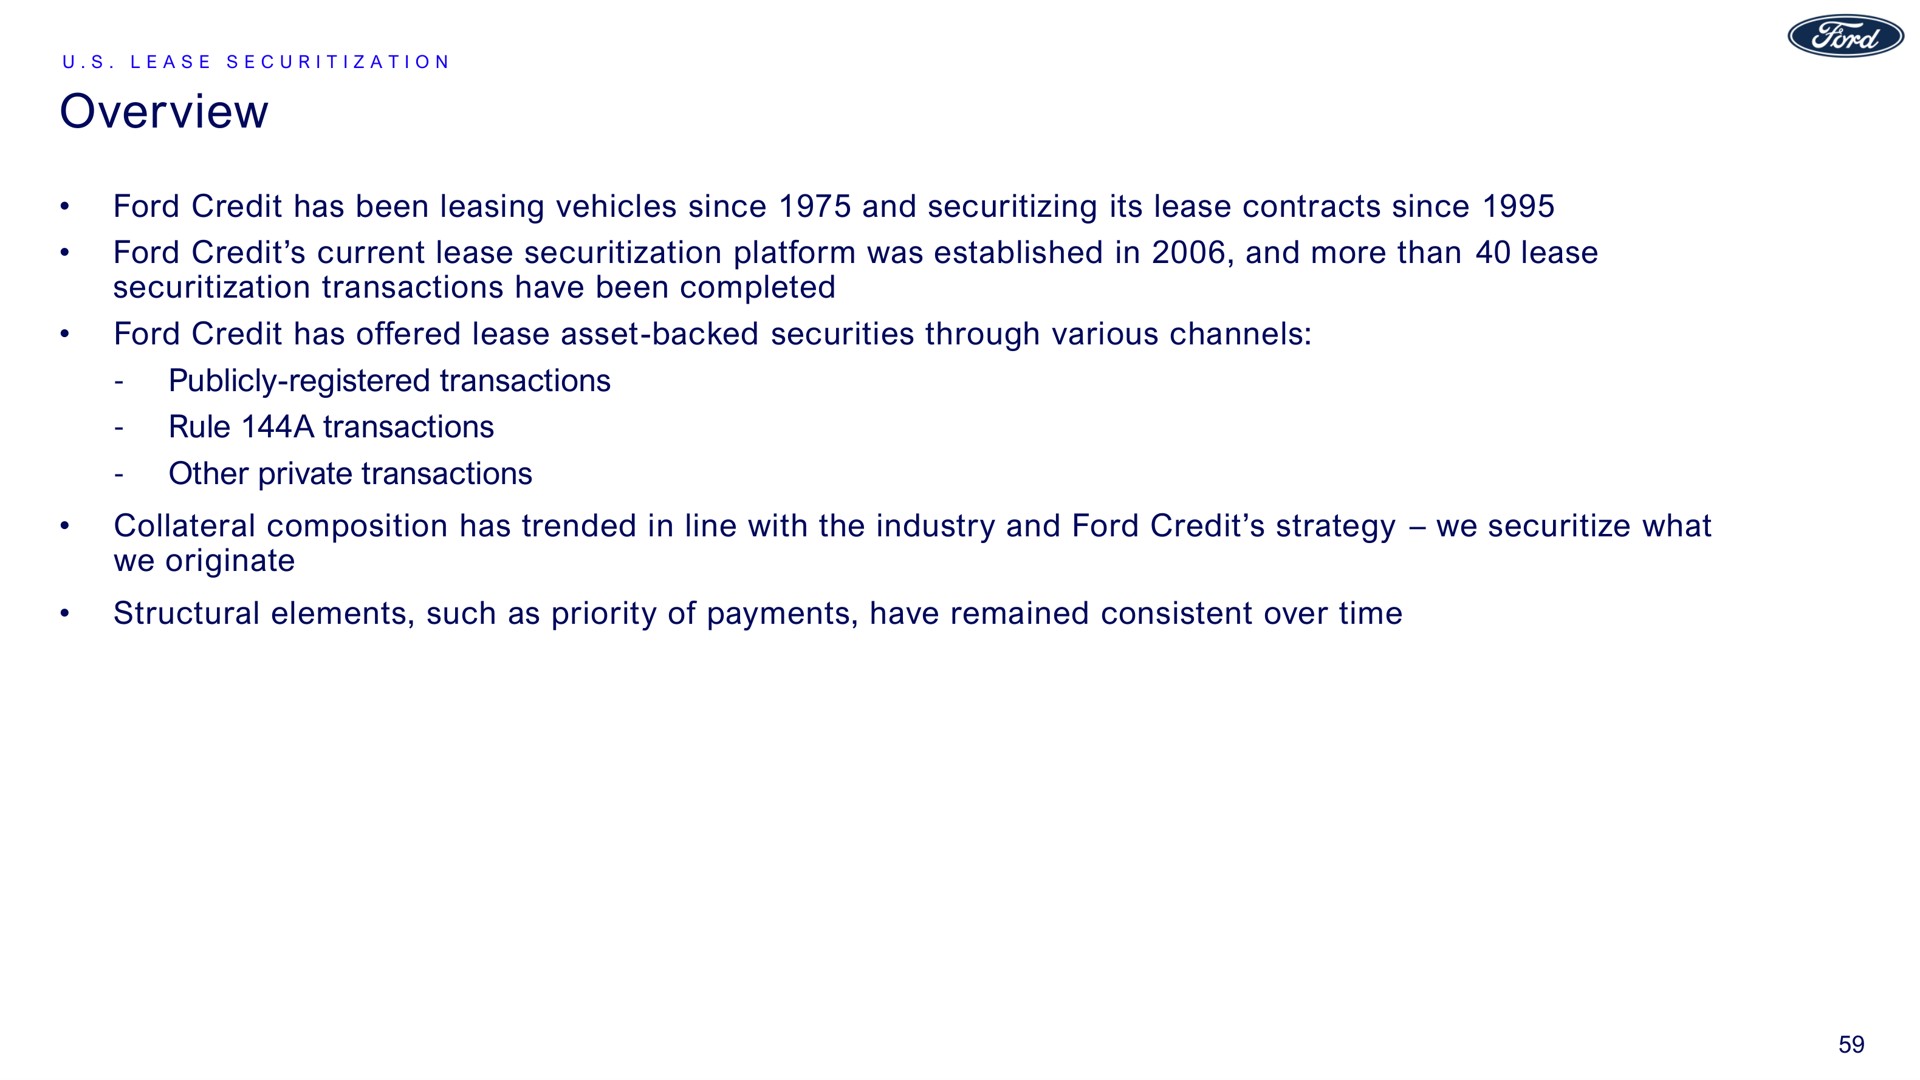 overview ford credit has been leasing vehicles since and its lease contracts since ford credit current lease platform was established in and more than lease transactions have been completed ford credit has offered lease asset backed securities through various channels publicly registered transactions rule a transactions other private transactions collateral composition has trended in line with the industry and ford credit strategy we what we originate structural elements such as priority of payments have remained consistent over time | Ford